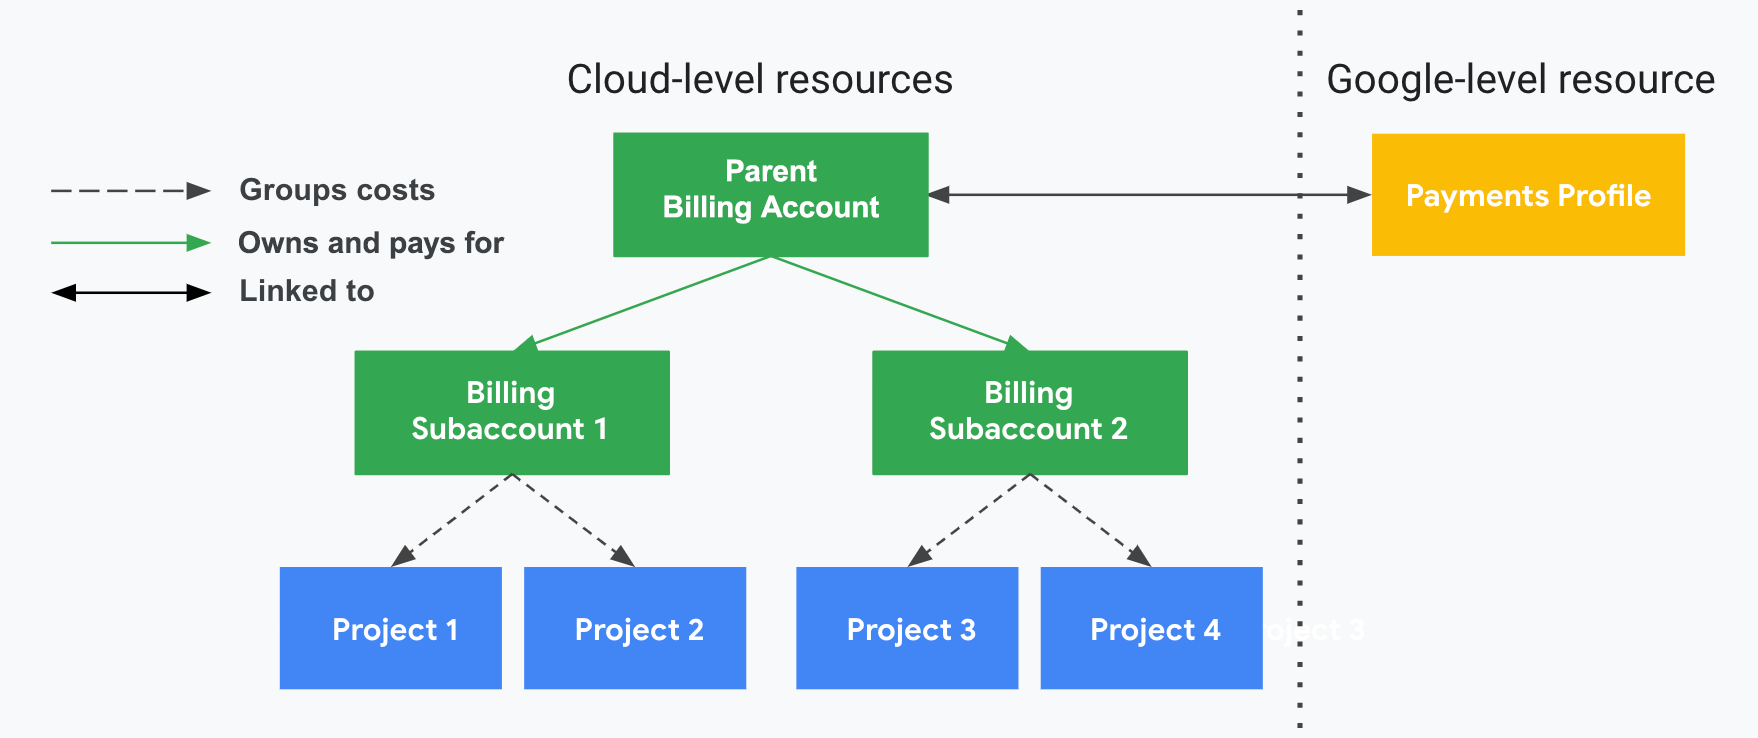 Describes how projects relate to Cloud Billing accounts,
         Cloud Billing subaccounts, and your payments profile. One side
         shows your Cloud-level resources (Cloud Billing account,
         subaccounts, and associated projects) and the other side, divided by a
         vertical dotted line, shows your Google-level resource (a
         payments profile). Project usage costs are grouped and subtotalled by
         the associated Cloud Billing subaccounts. Subaccounts are paid
         for by the reseller's parent Cloud Billing account, which is
         linked to your payments profile.